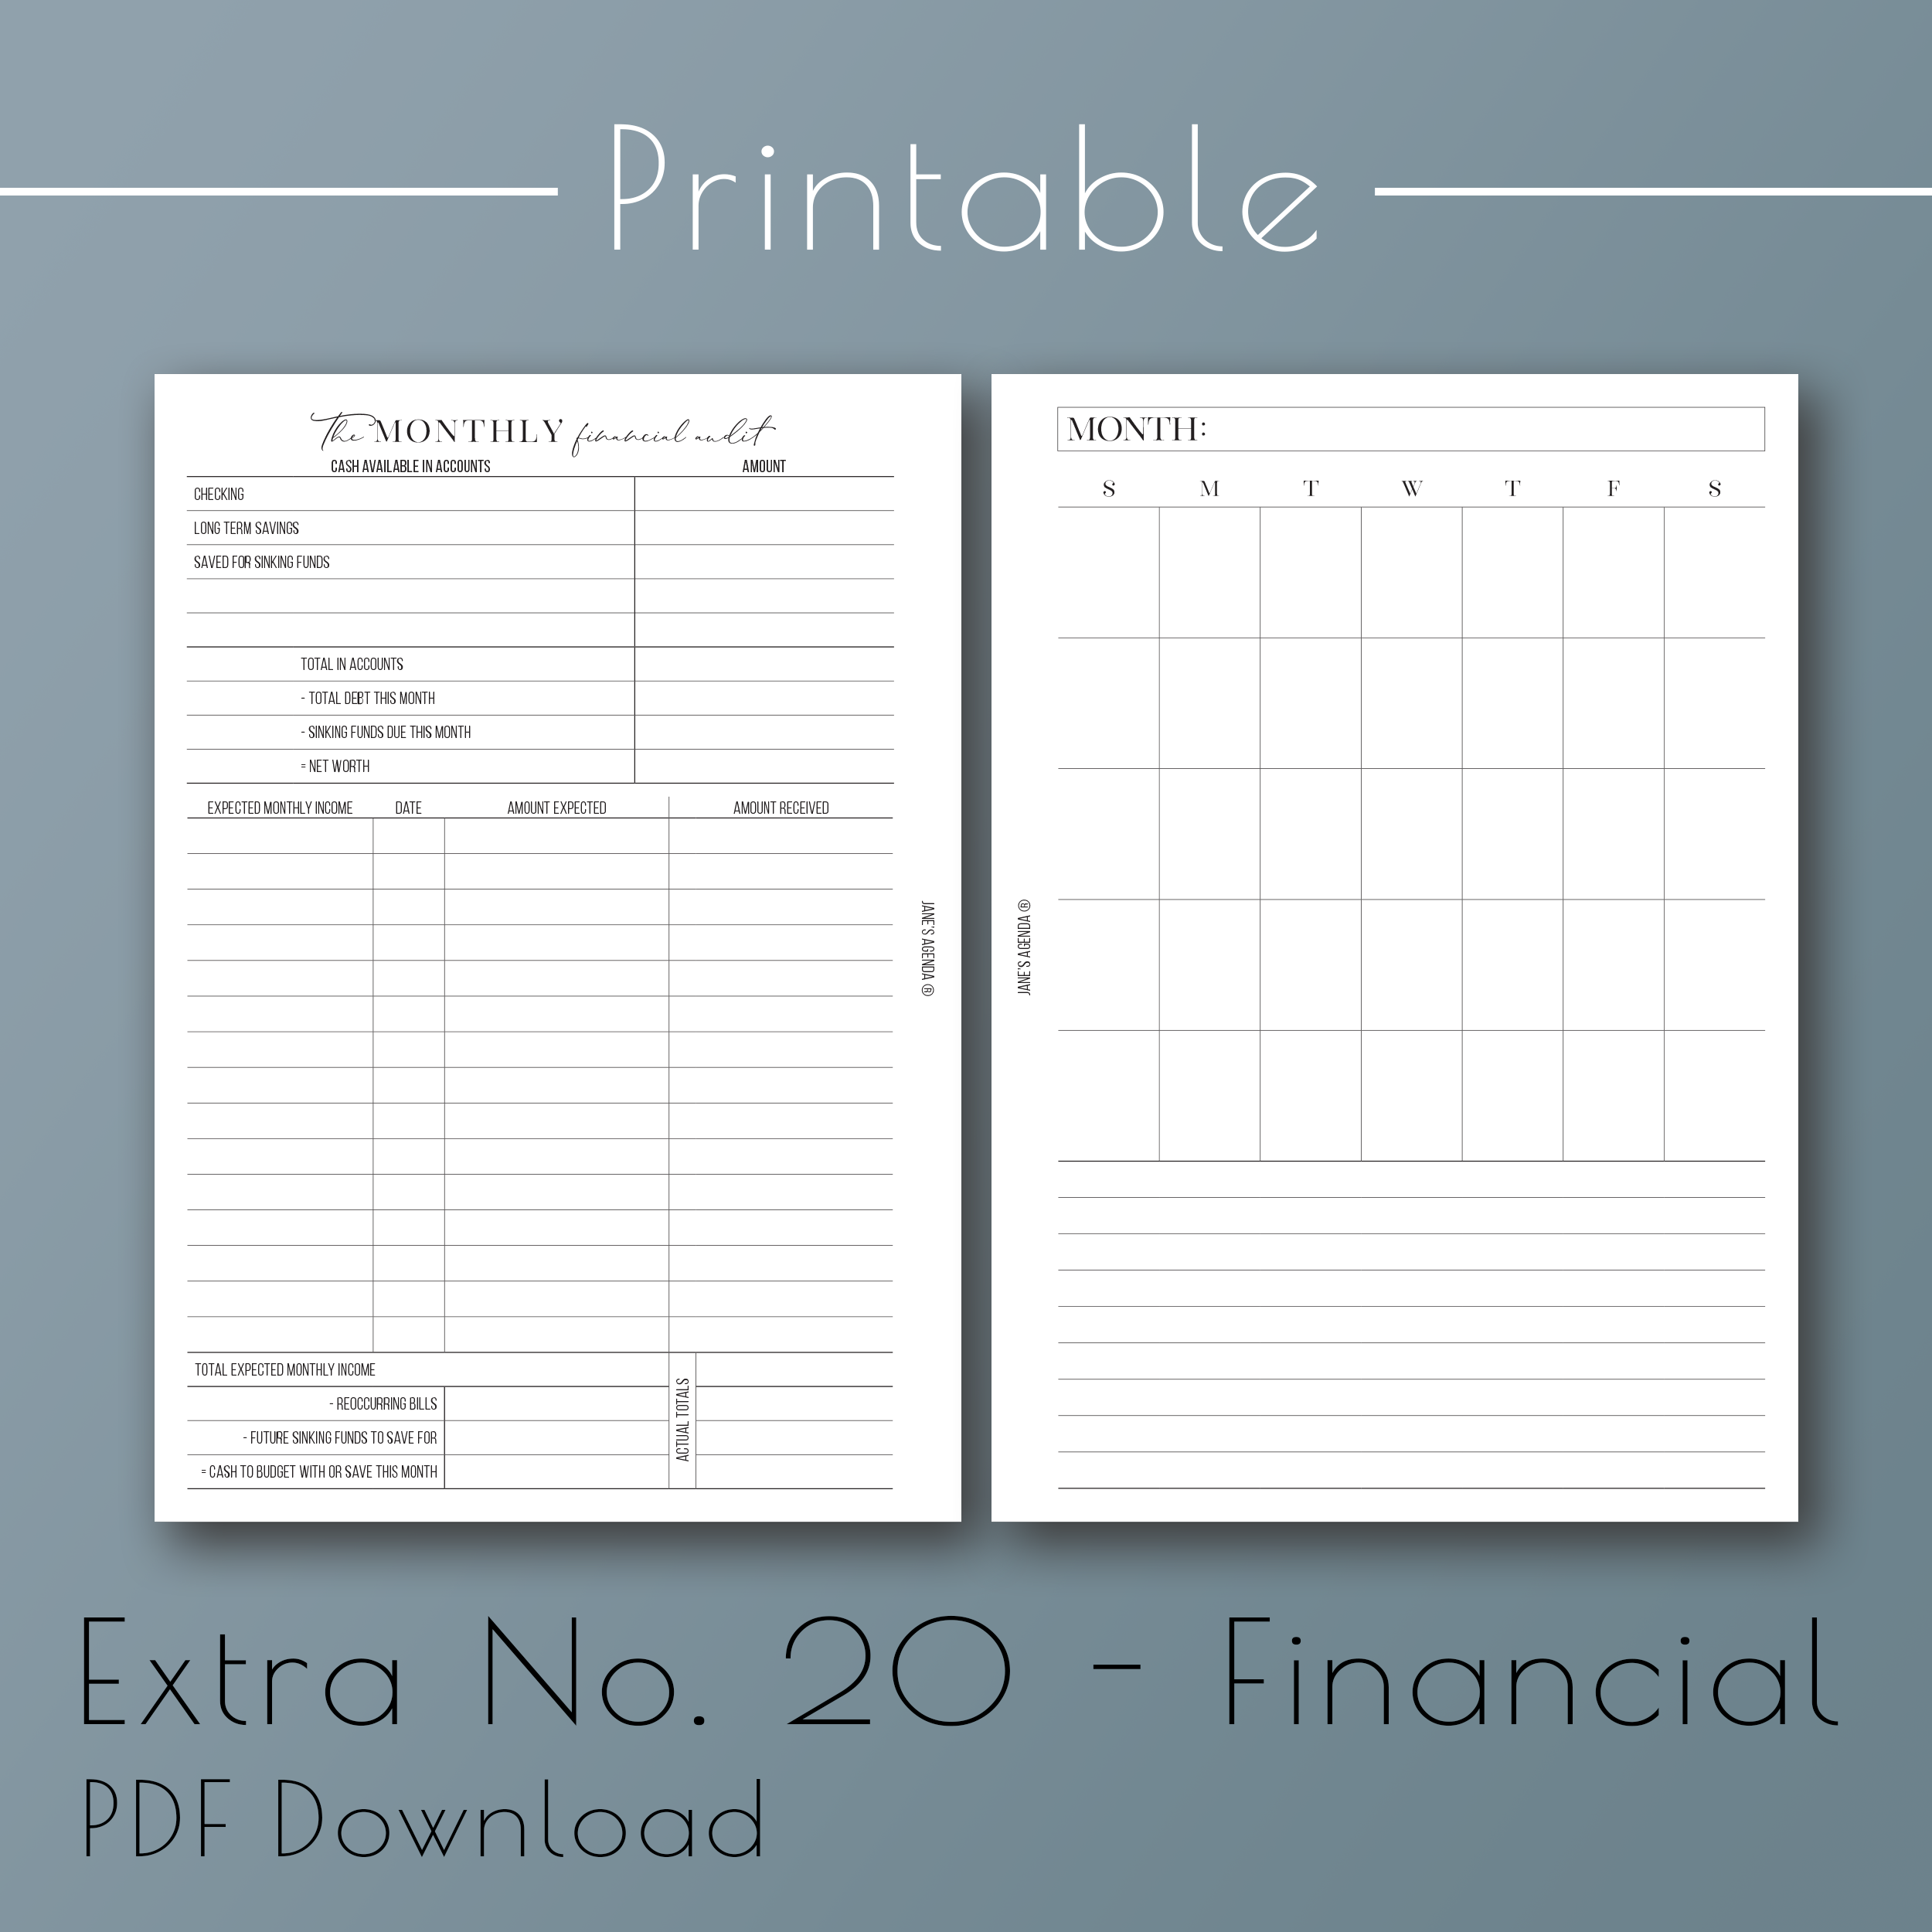 PRINTED A5 Budget Planner Inserts Uk Monthly Budget Finance 